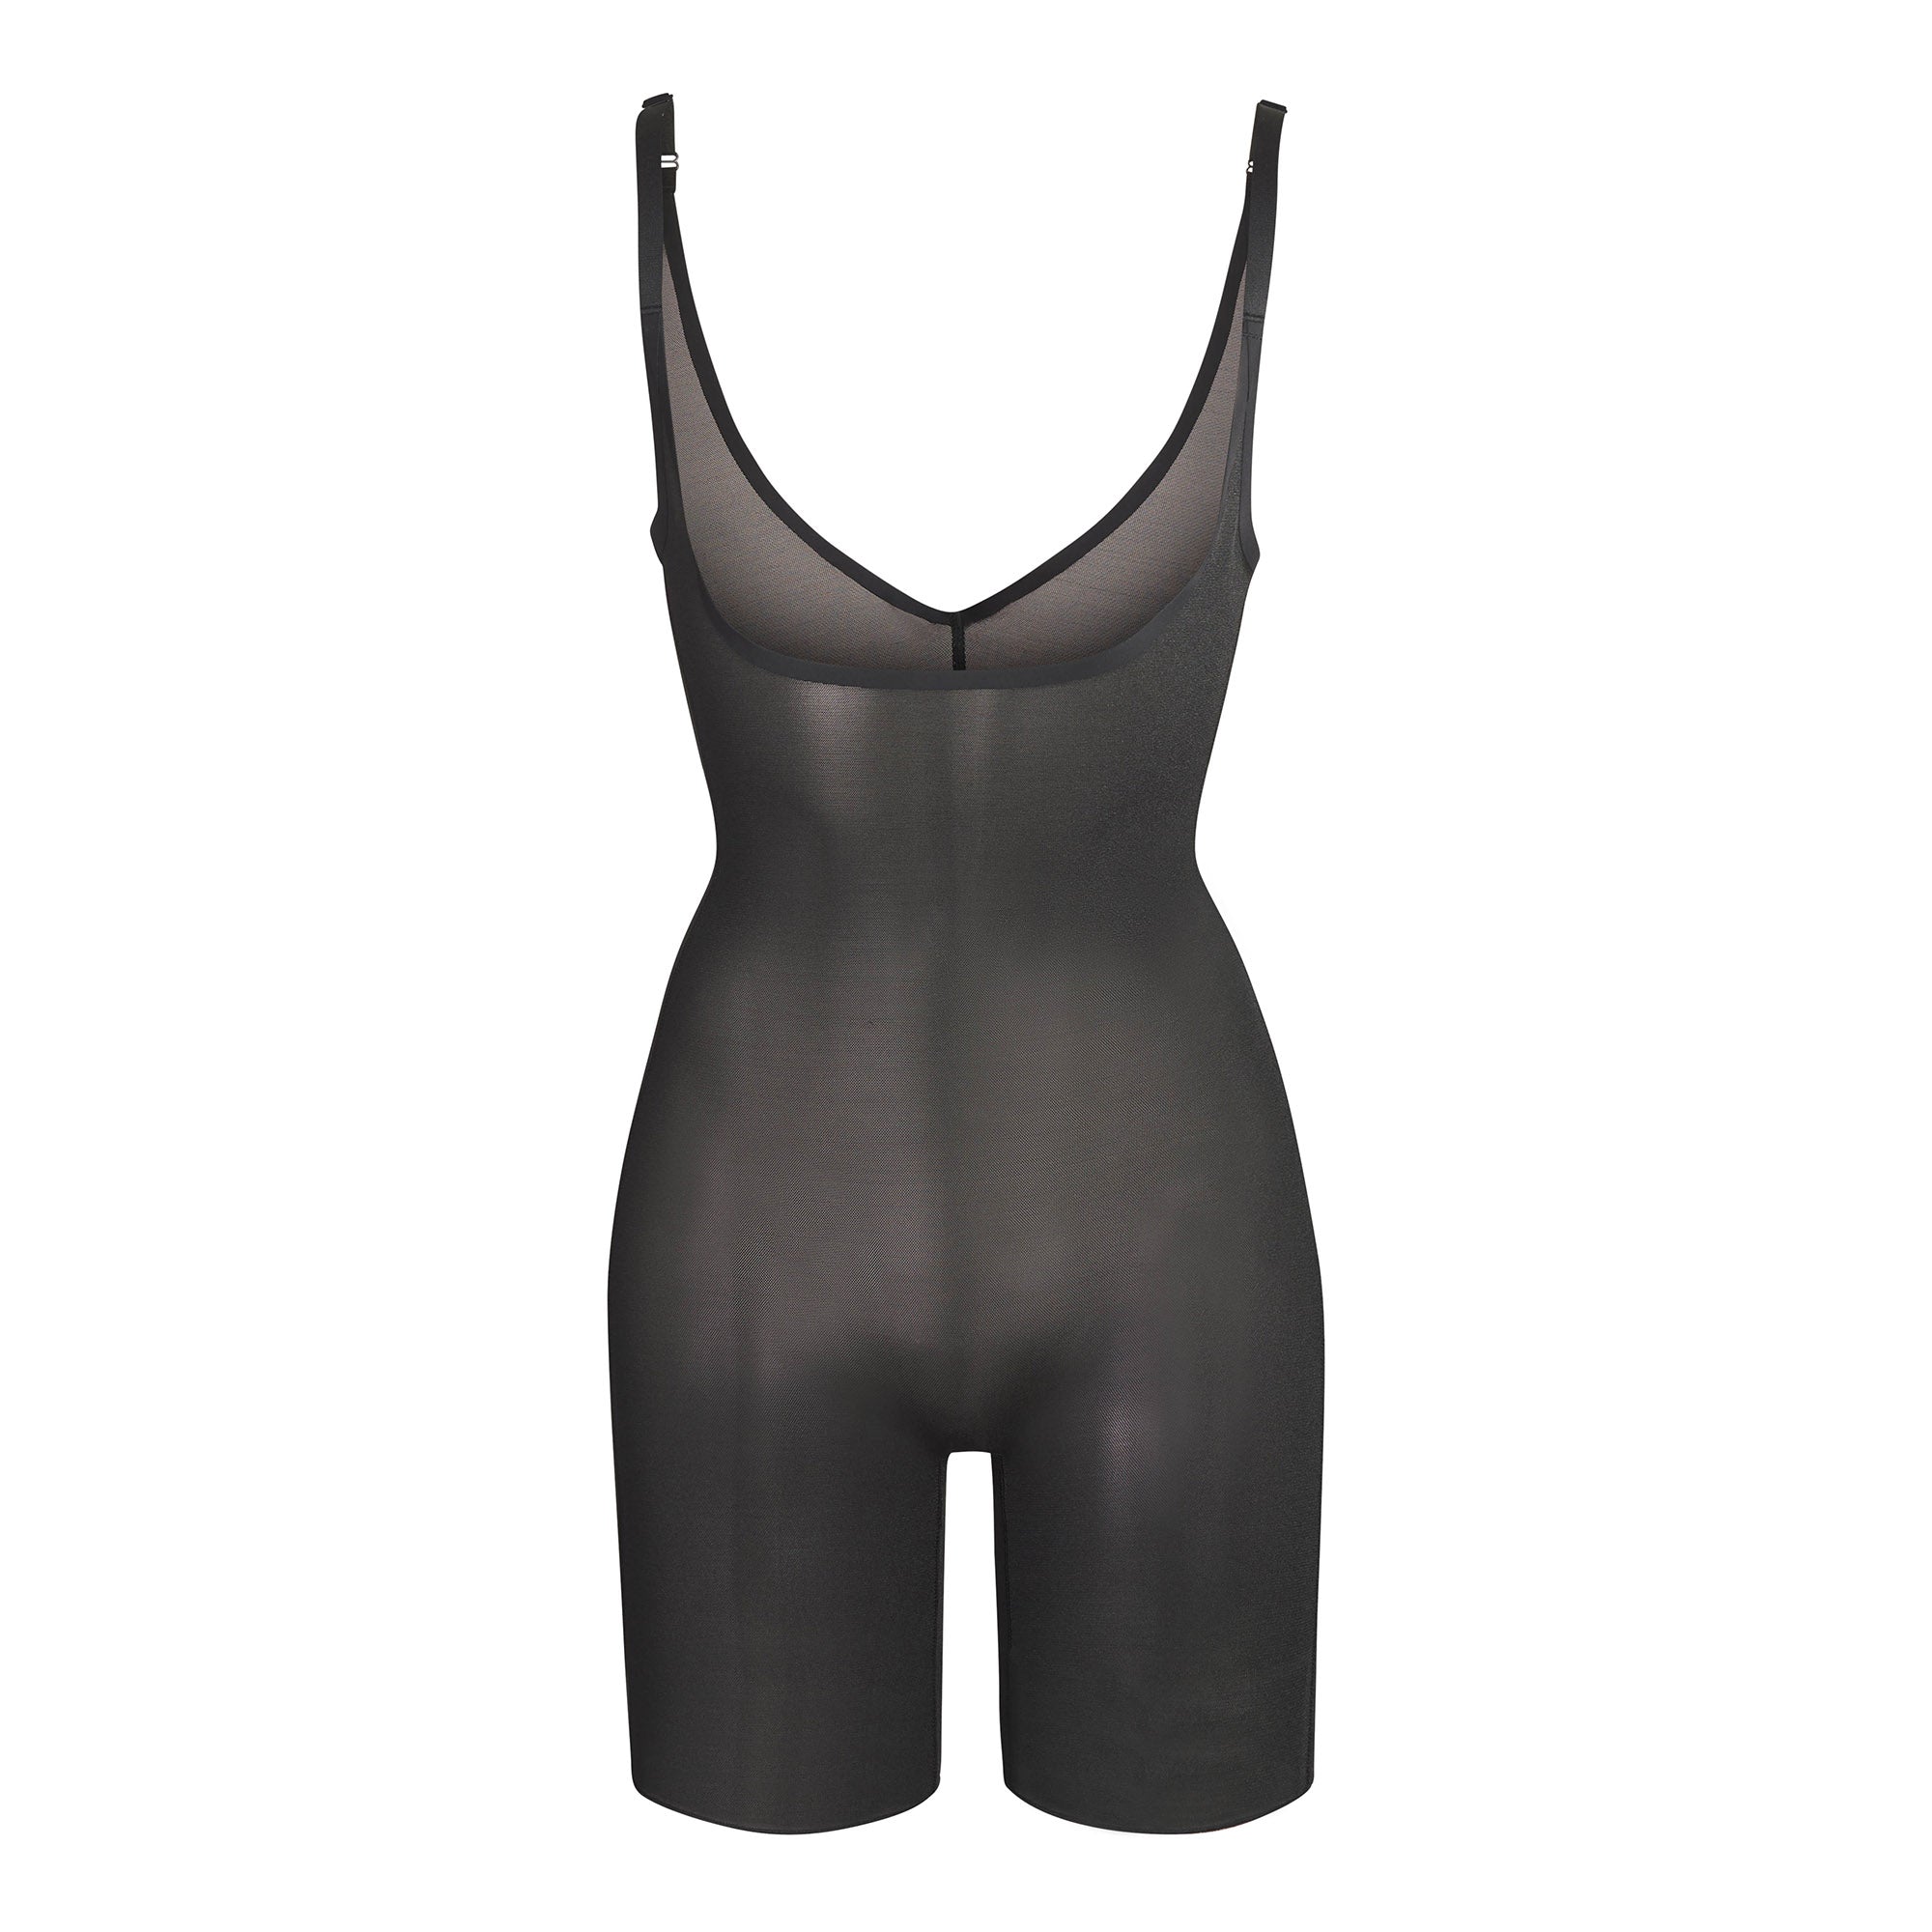 SKIMS on X: Run, don't walk. The ultra-flattering Sheer Sculpt Catsuit is  back in stock! Get yours and fall in love with the lightweight, full-body  compression that smooths and sculpts in all